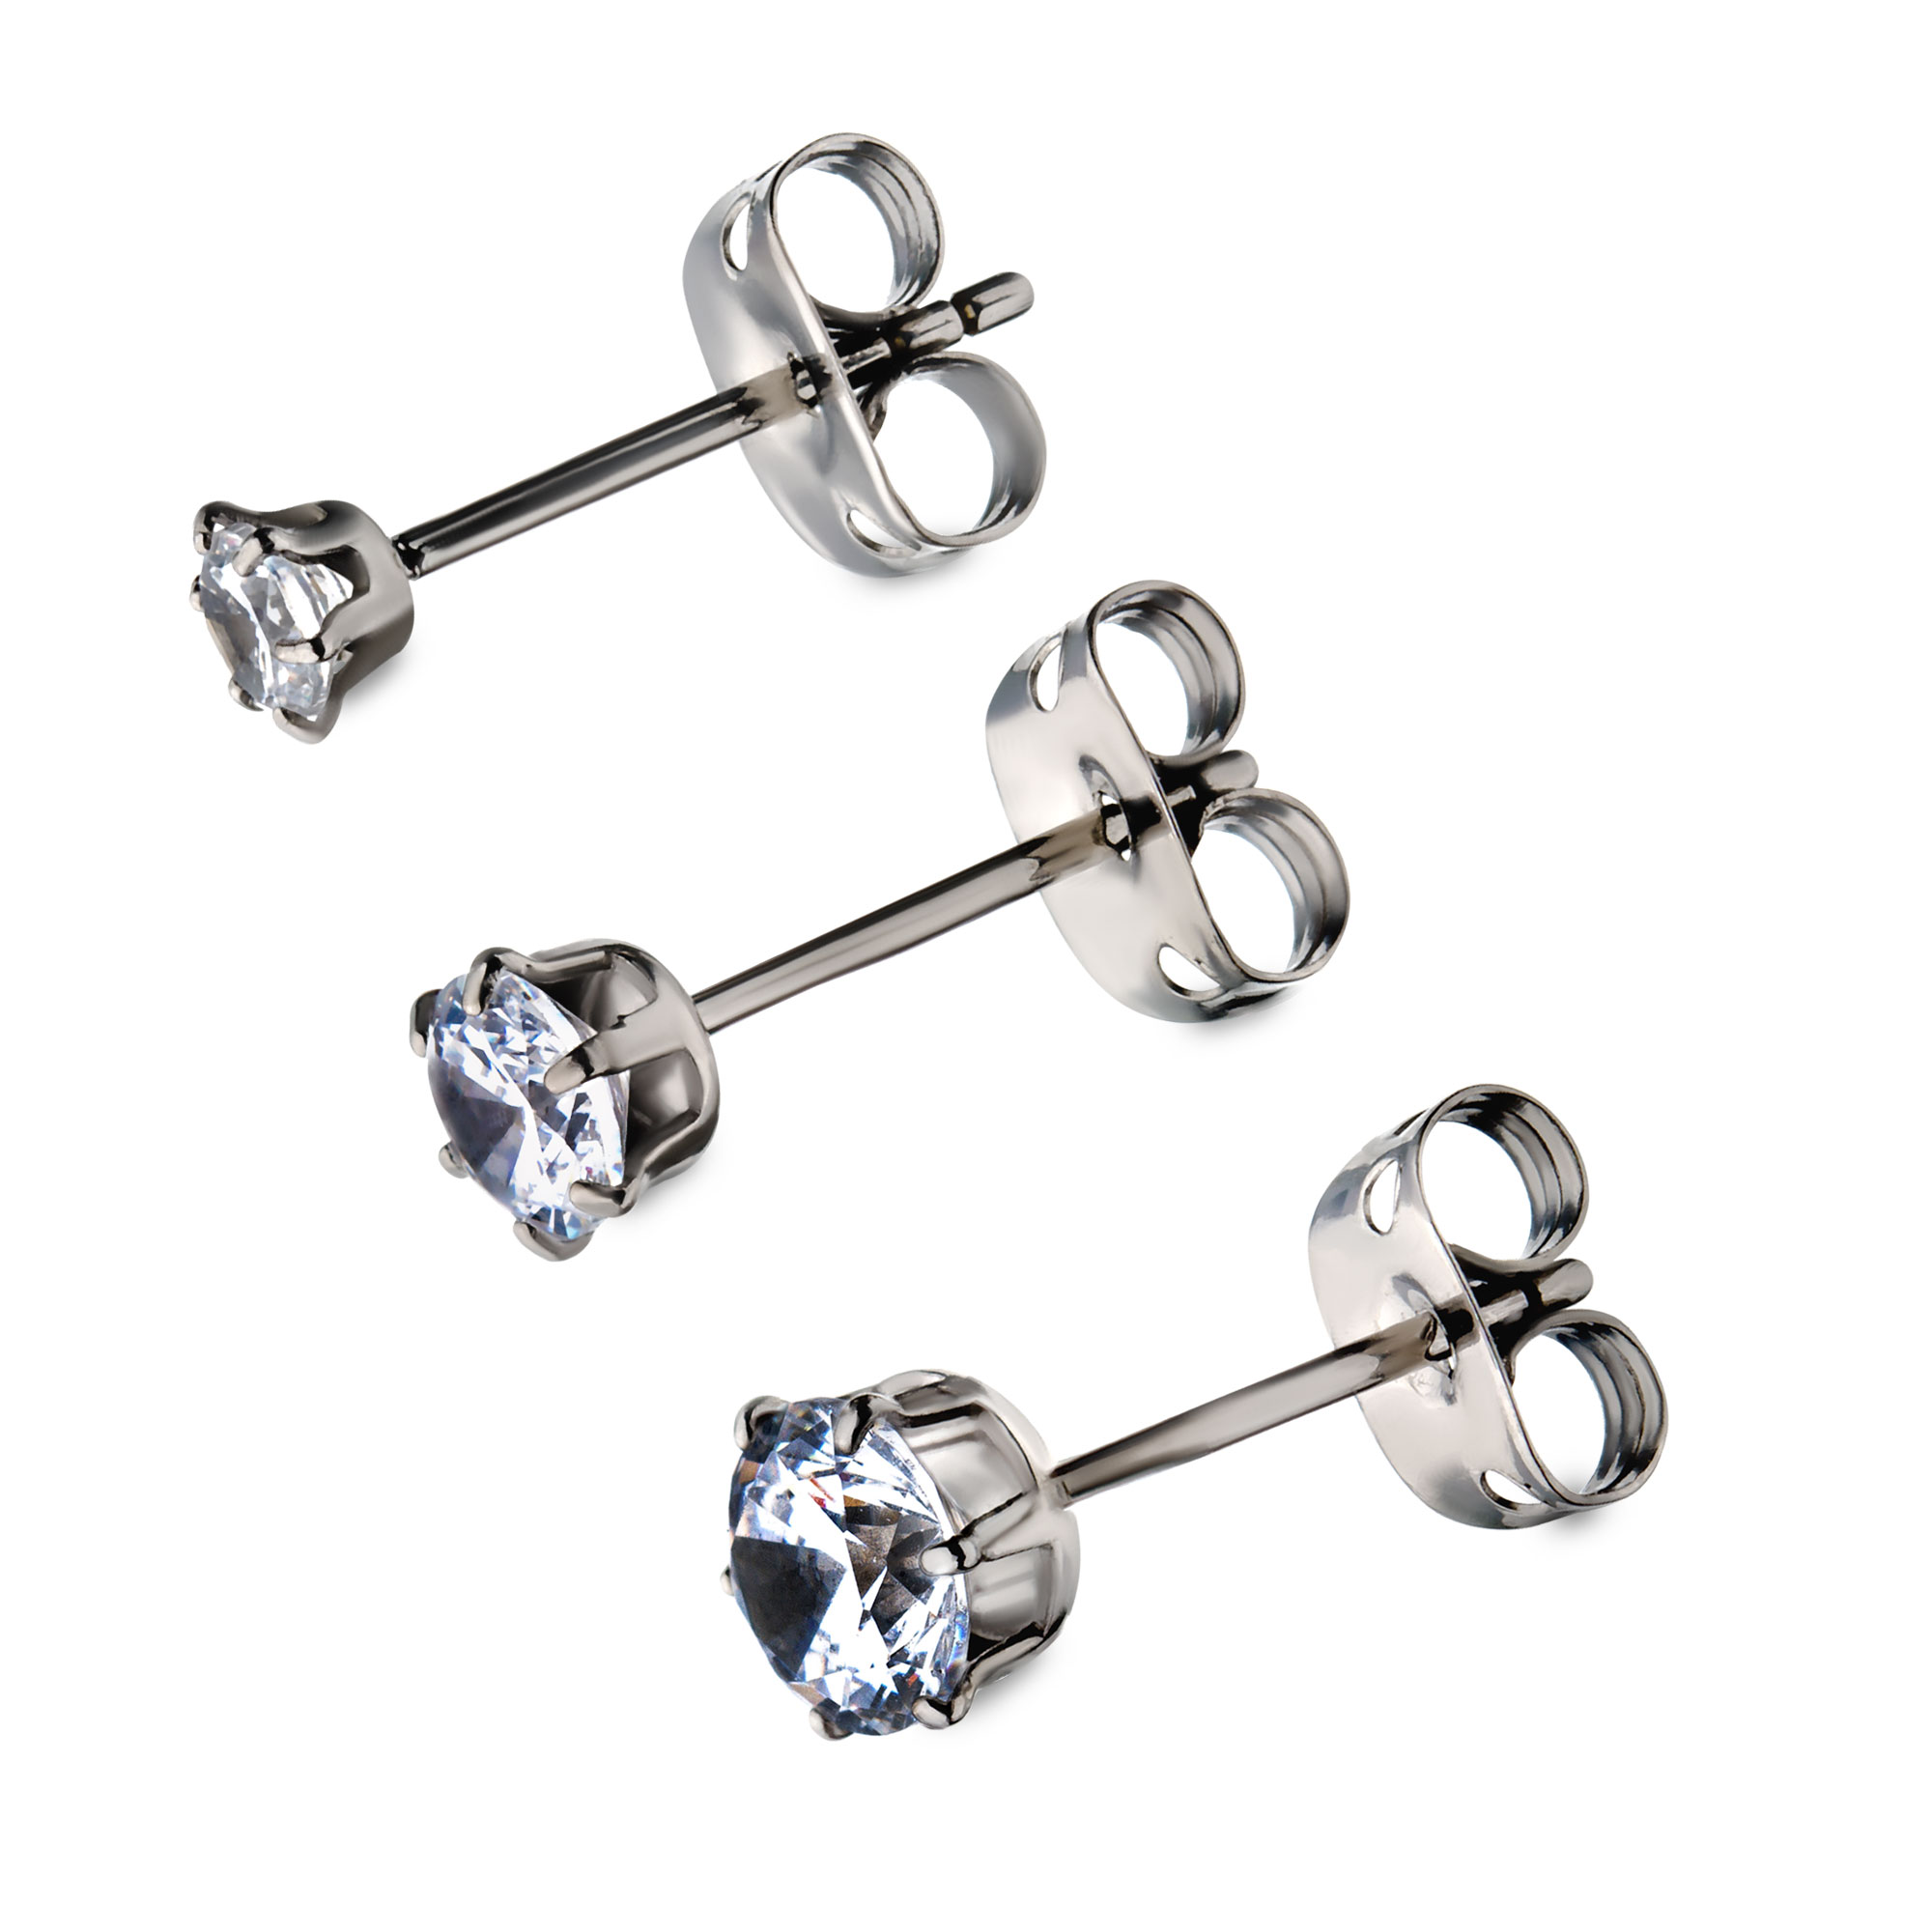 20g Titanium Post and Butterfly Back with Prong Set CZ Stud Earrings Image 2 Midtown Diamonds Reno, NV